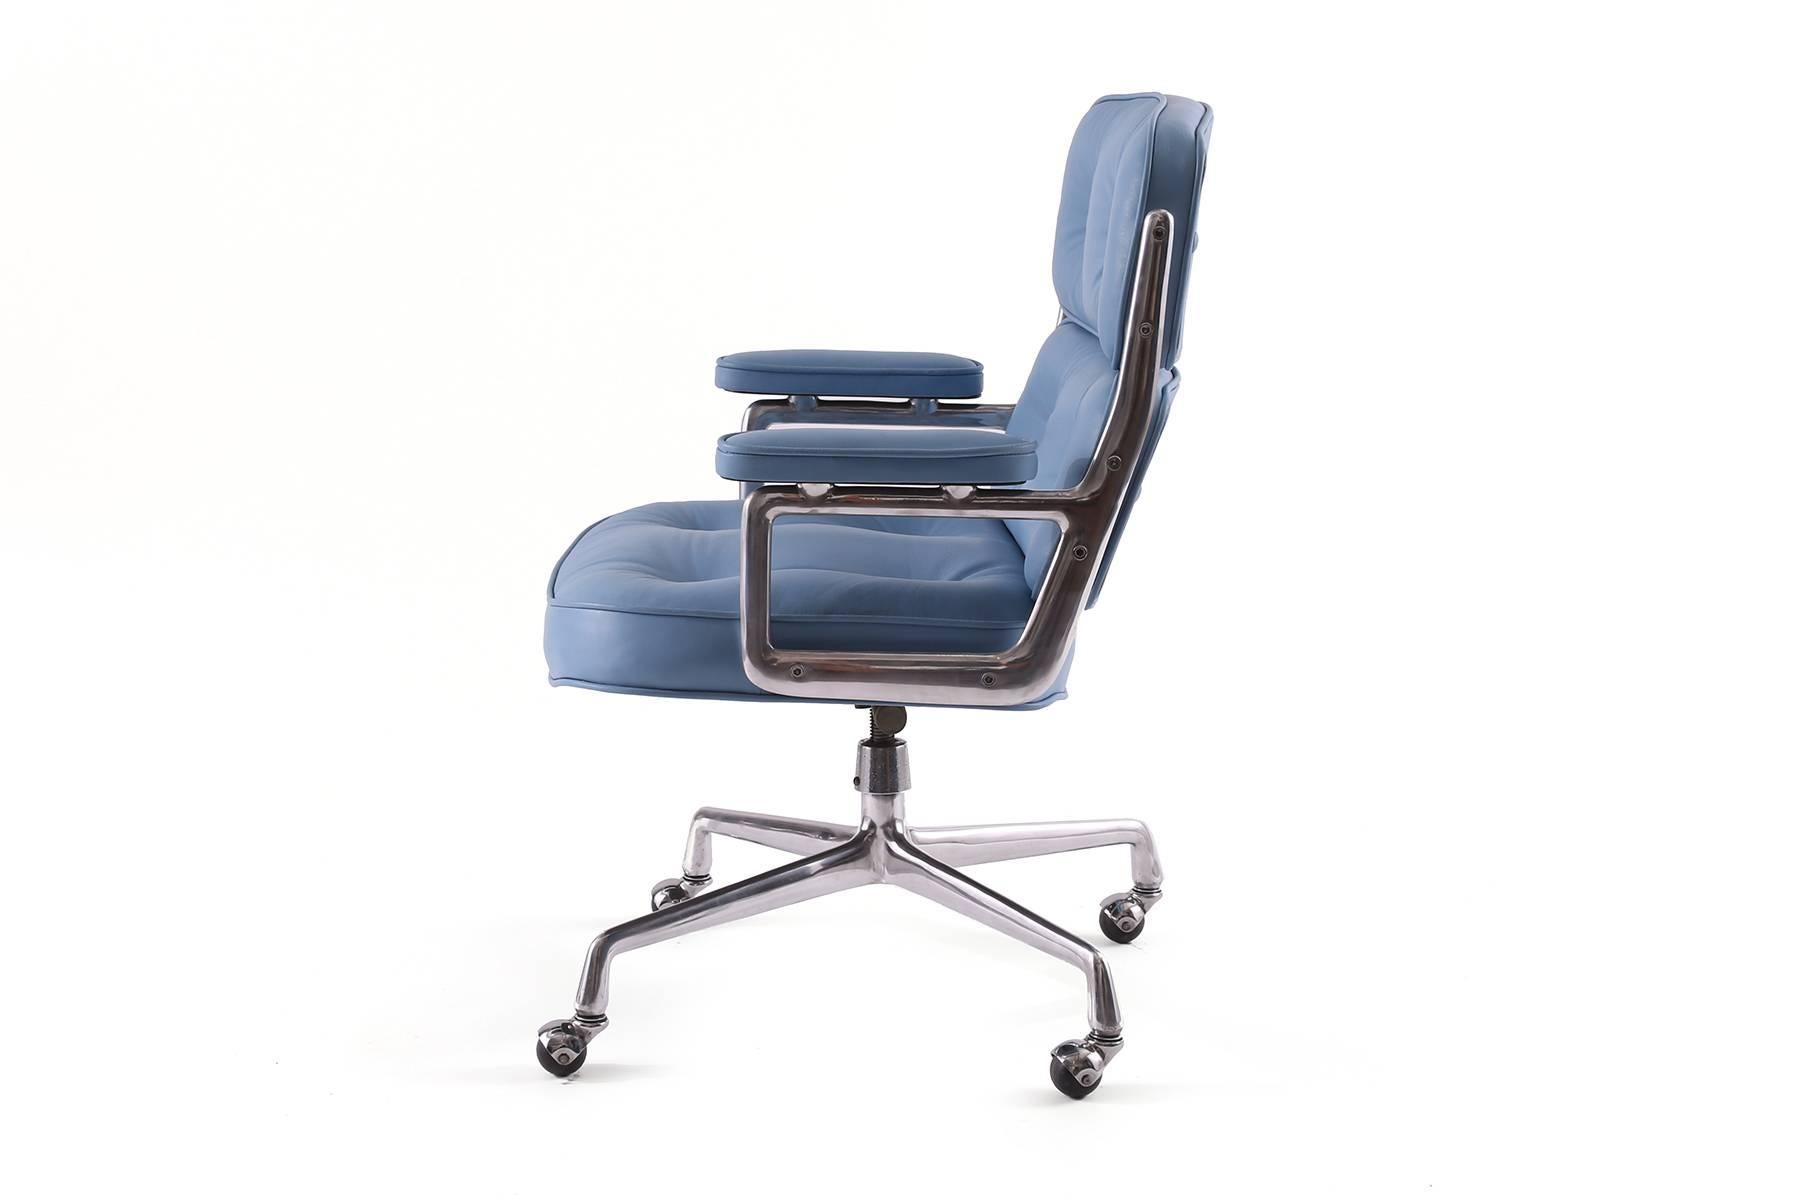 Charles and Ray Eames for Herman Miller leather 'Time Life' chair circa early 1970s. This stunning example has been newly upholstered in a supple robin's egg blue leather and the steel arms base and accents impeccably polished. Measures: Arm height